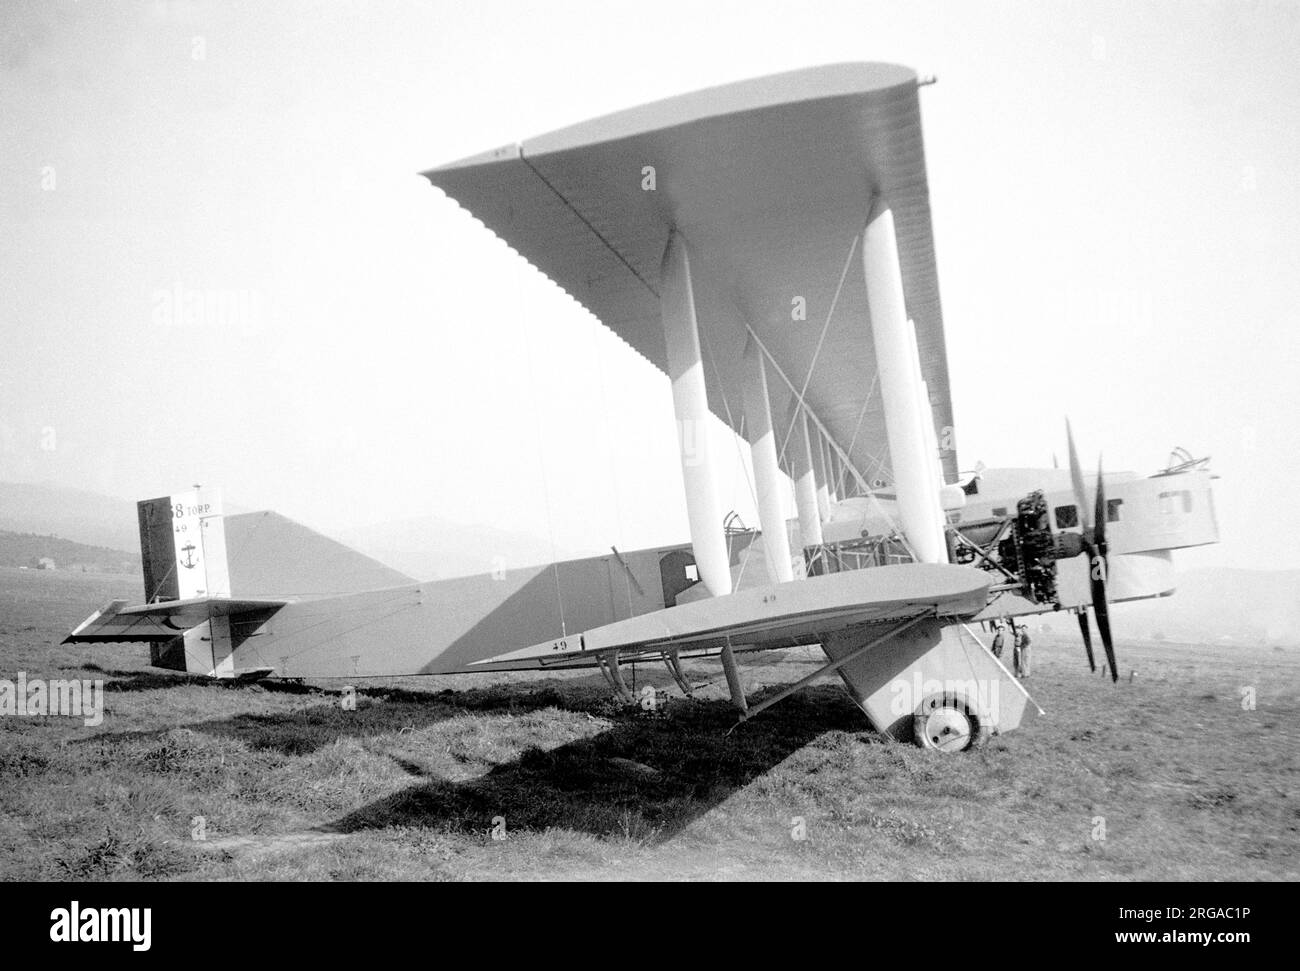 Aviation Marine Francaise - Farman F.168 Torp. number 49. The F.168 was an outgrowth of the earlier F.60 series of bombers and could fly as a landplane or floats, though images of landplanes are not common. Stock Photo